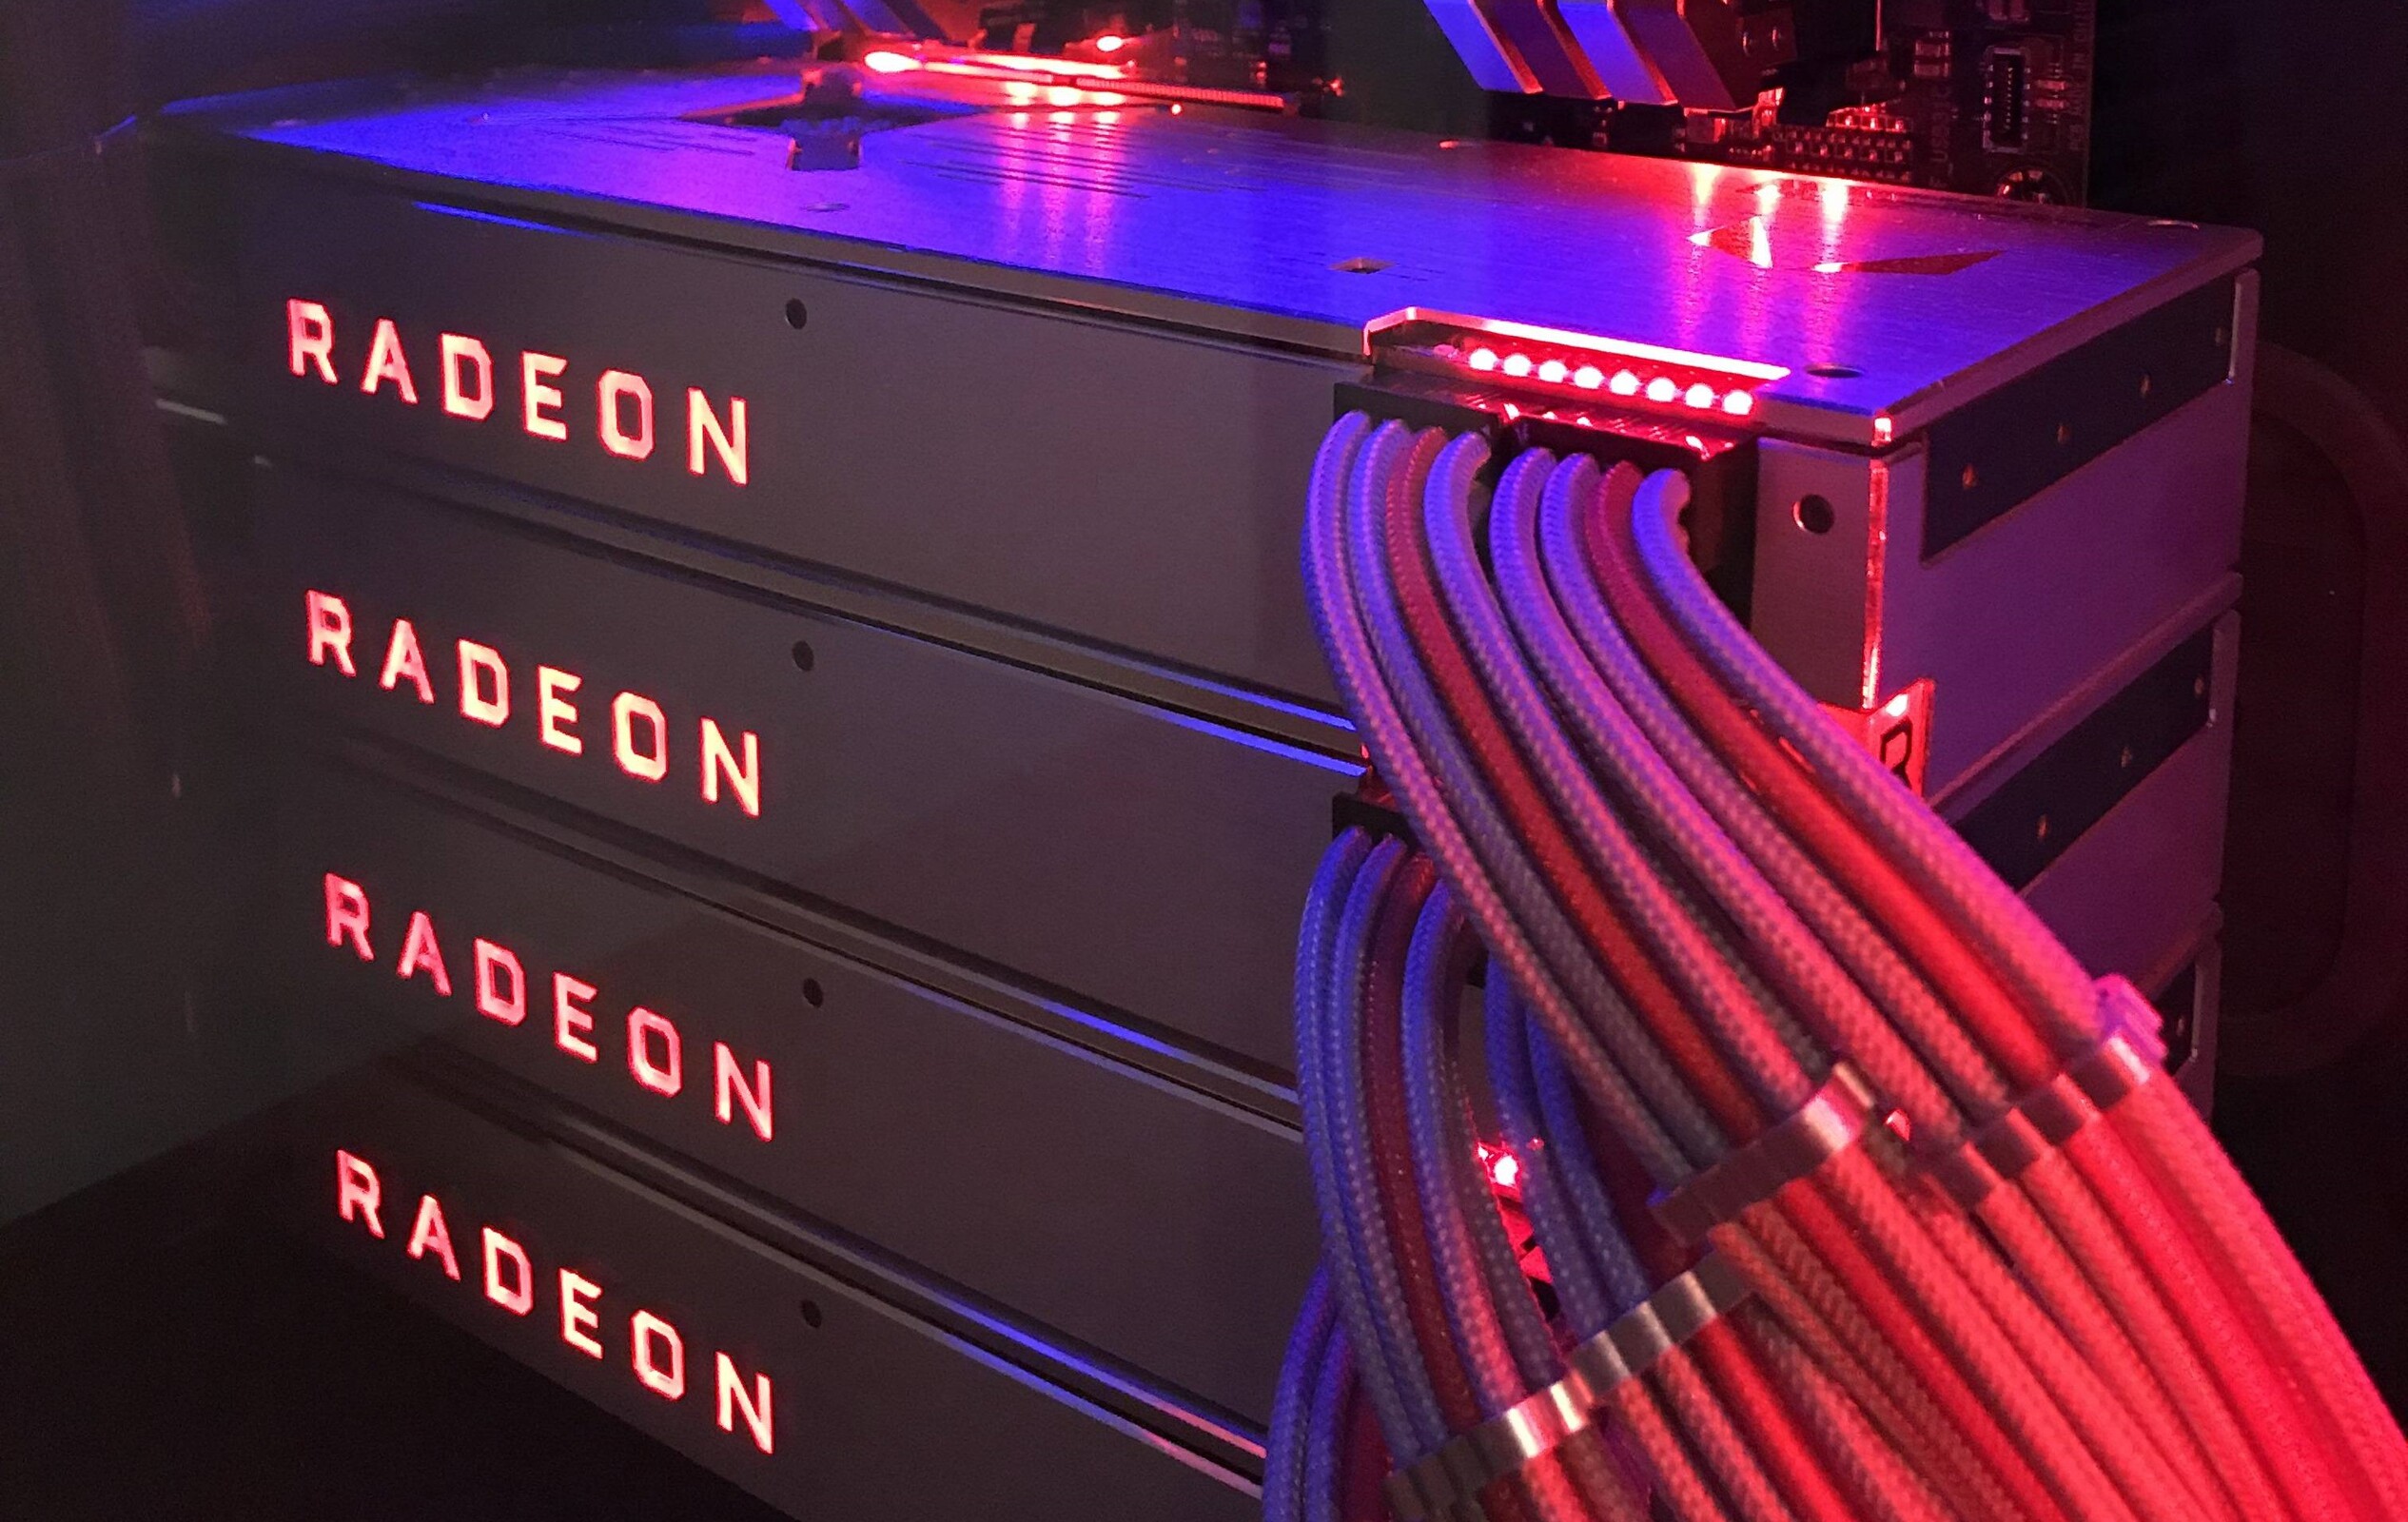 AMD fan amazes the team with custom build PC featuring RX Vega 64 LC graphics cards - NotebookCheck.net News